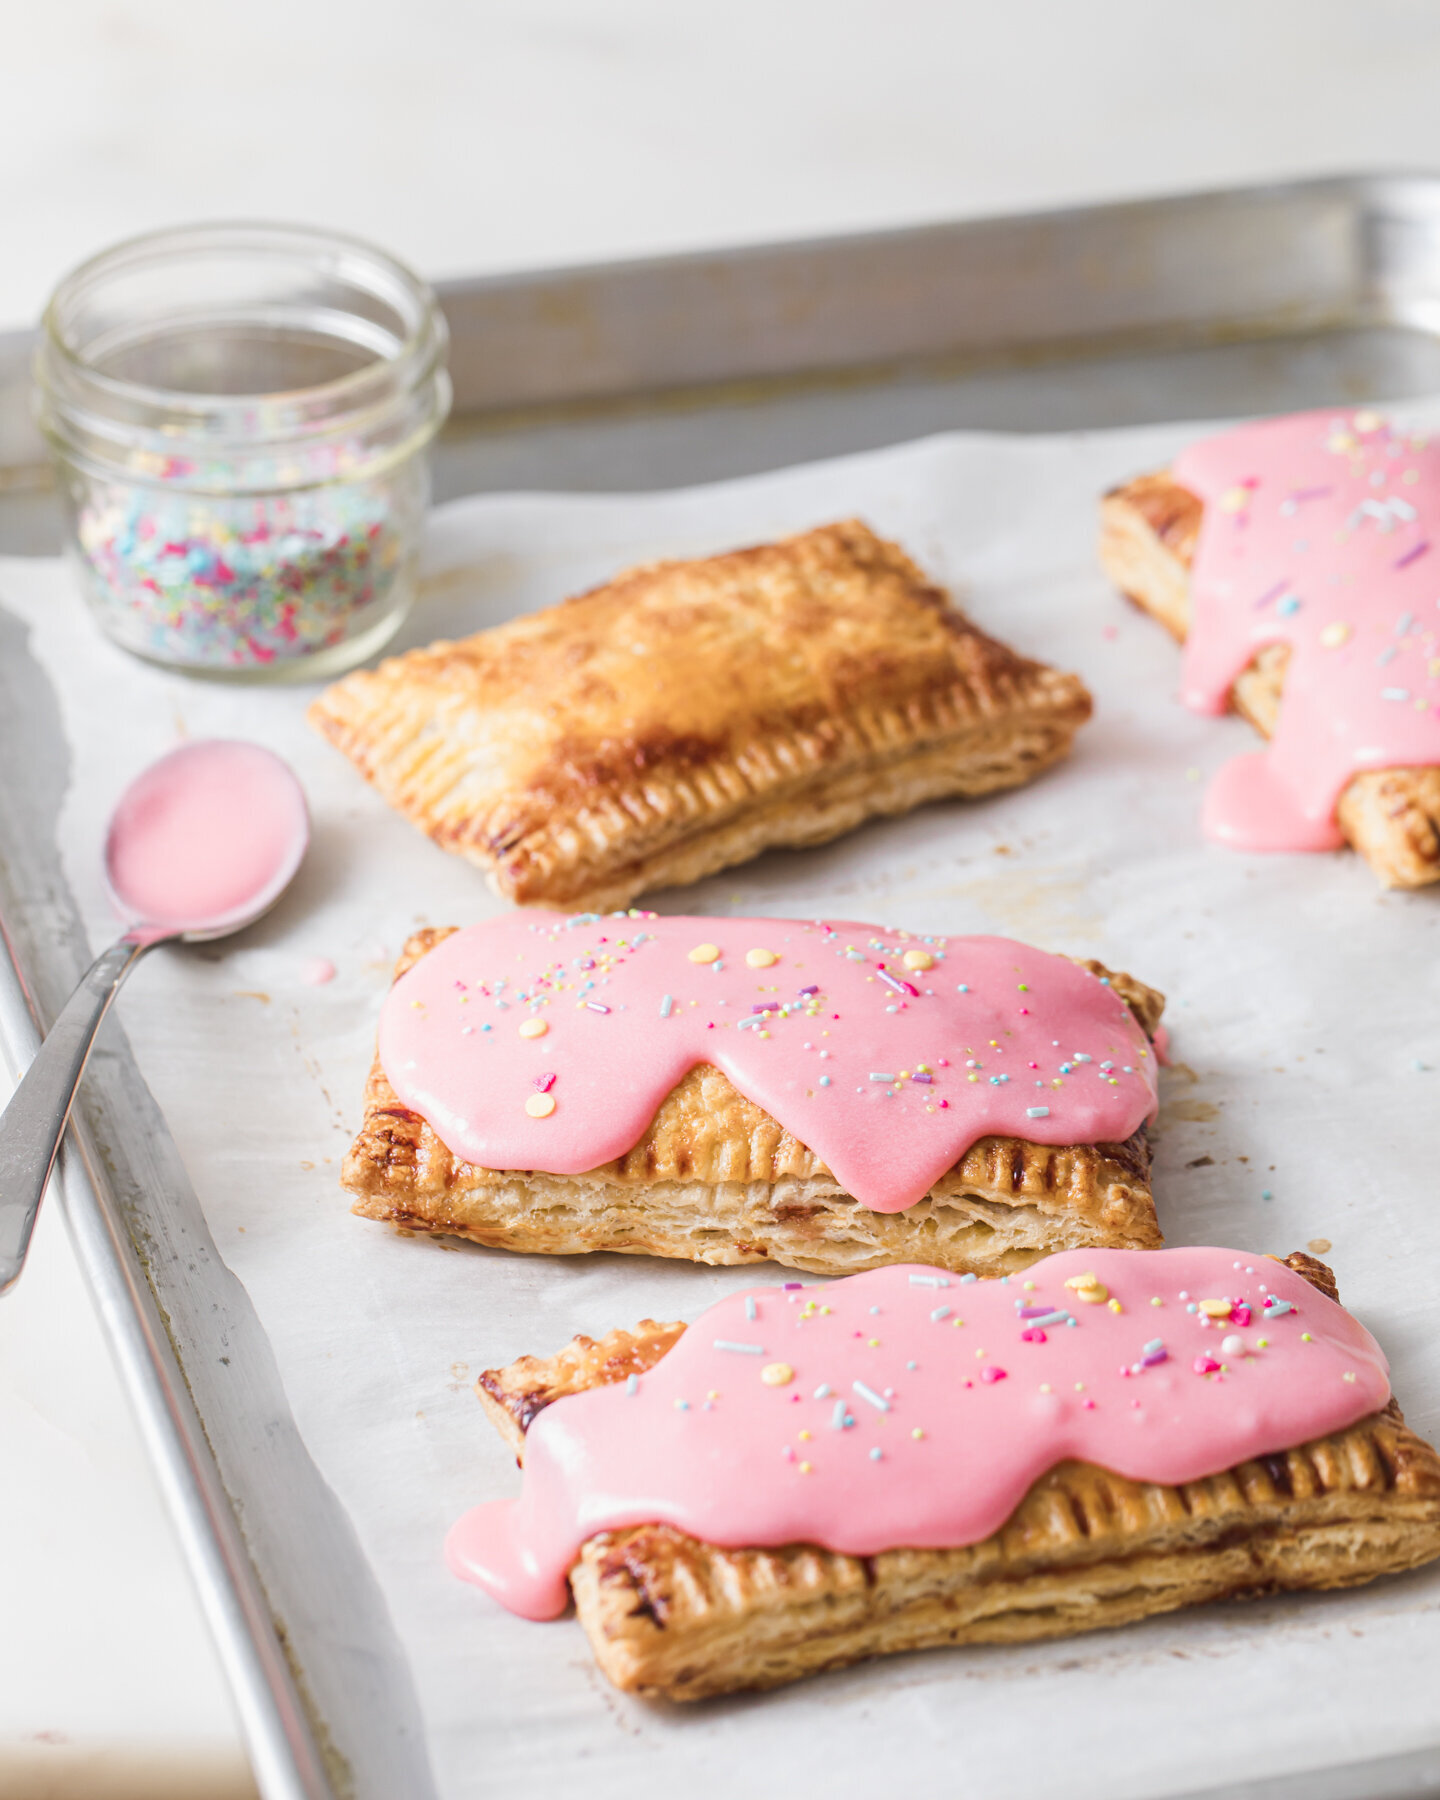 Homemade strawberry pop tarts with pink glaze and sprinkles.